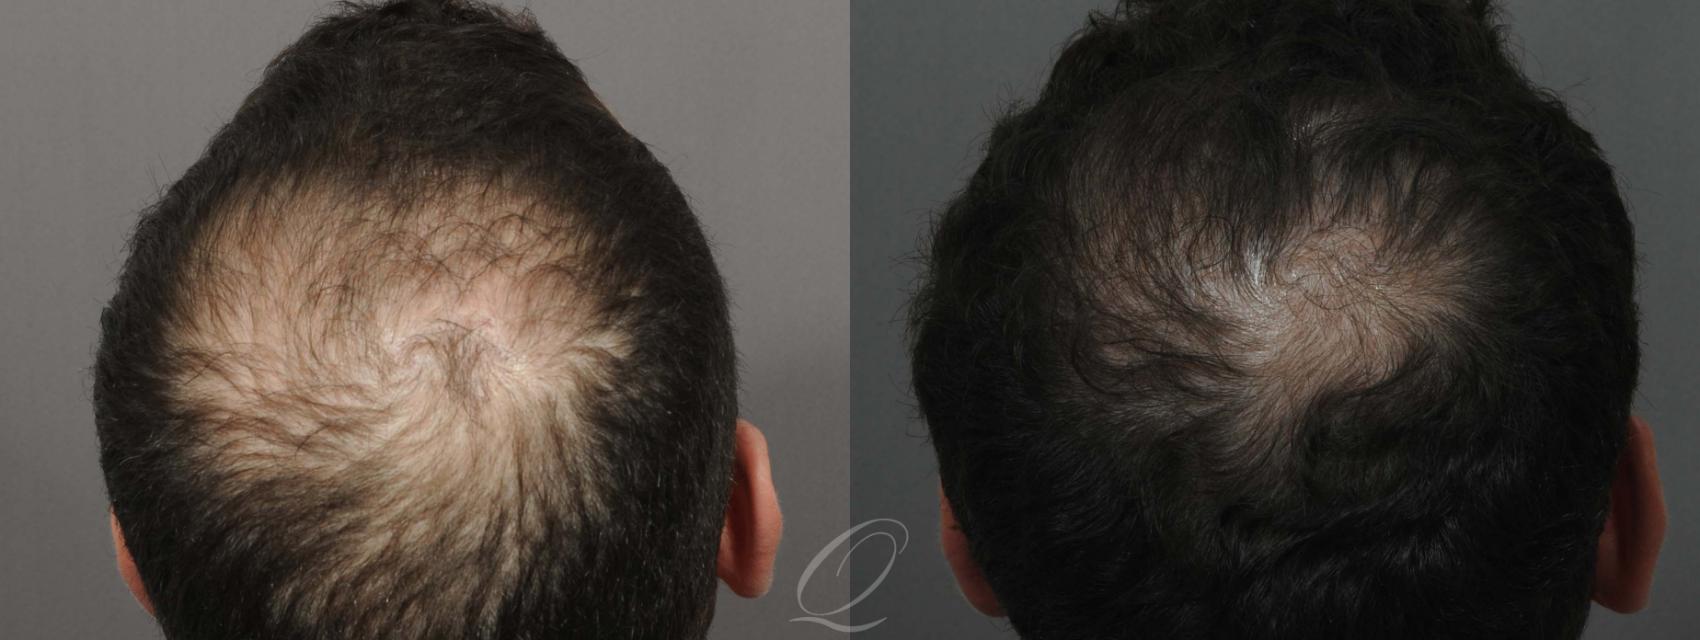 FUT Case 1032 Before & After View #1 | Rochester, Buffalo, & Syracuse, NY | Quatela Center for Hair Restoration